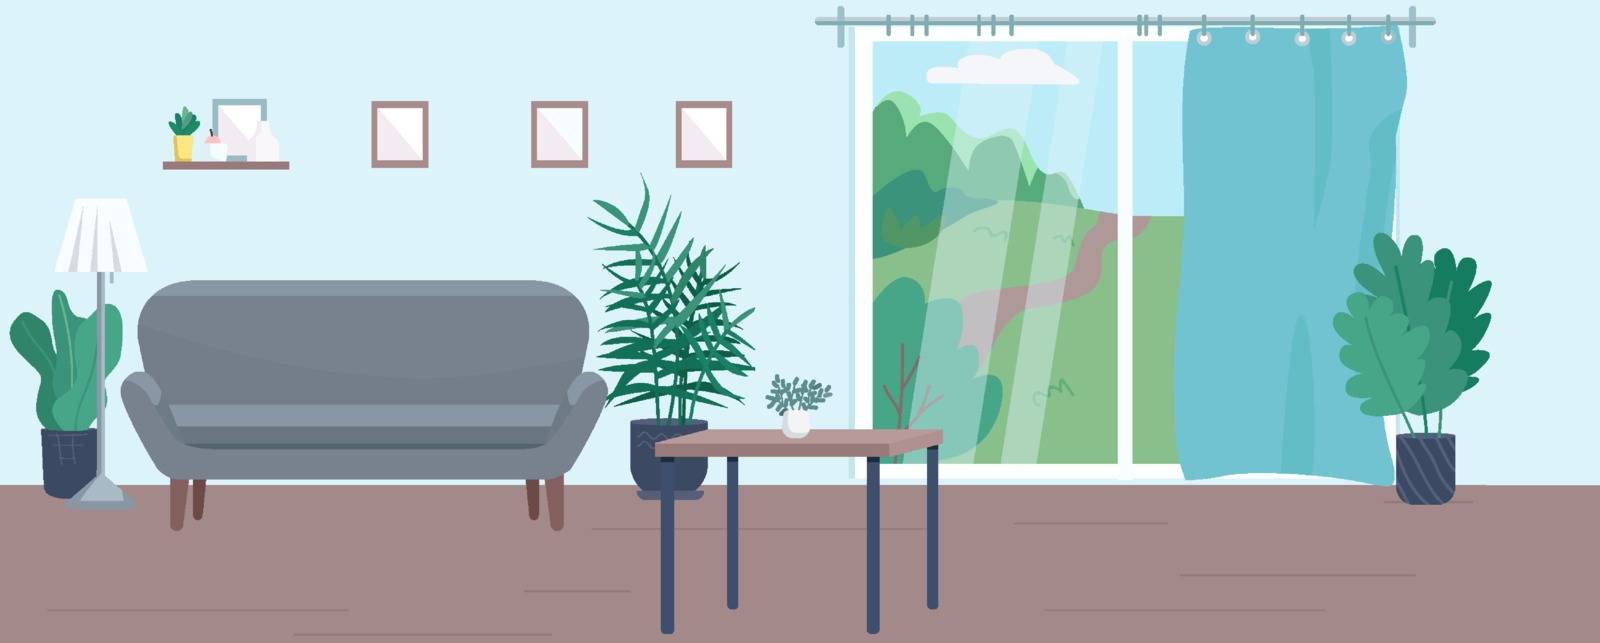 Empty living room flat color vector illustration by ntl